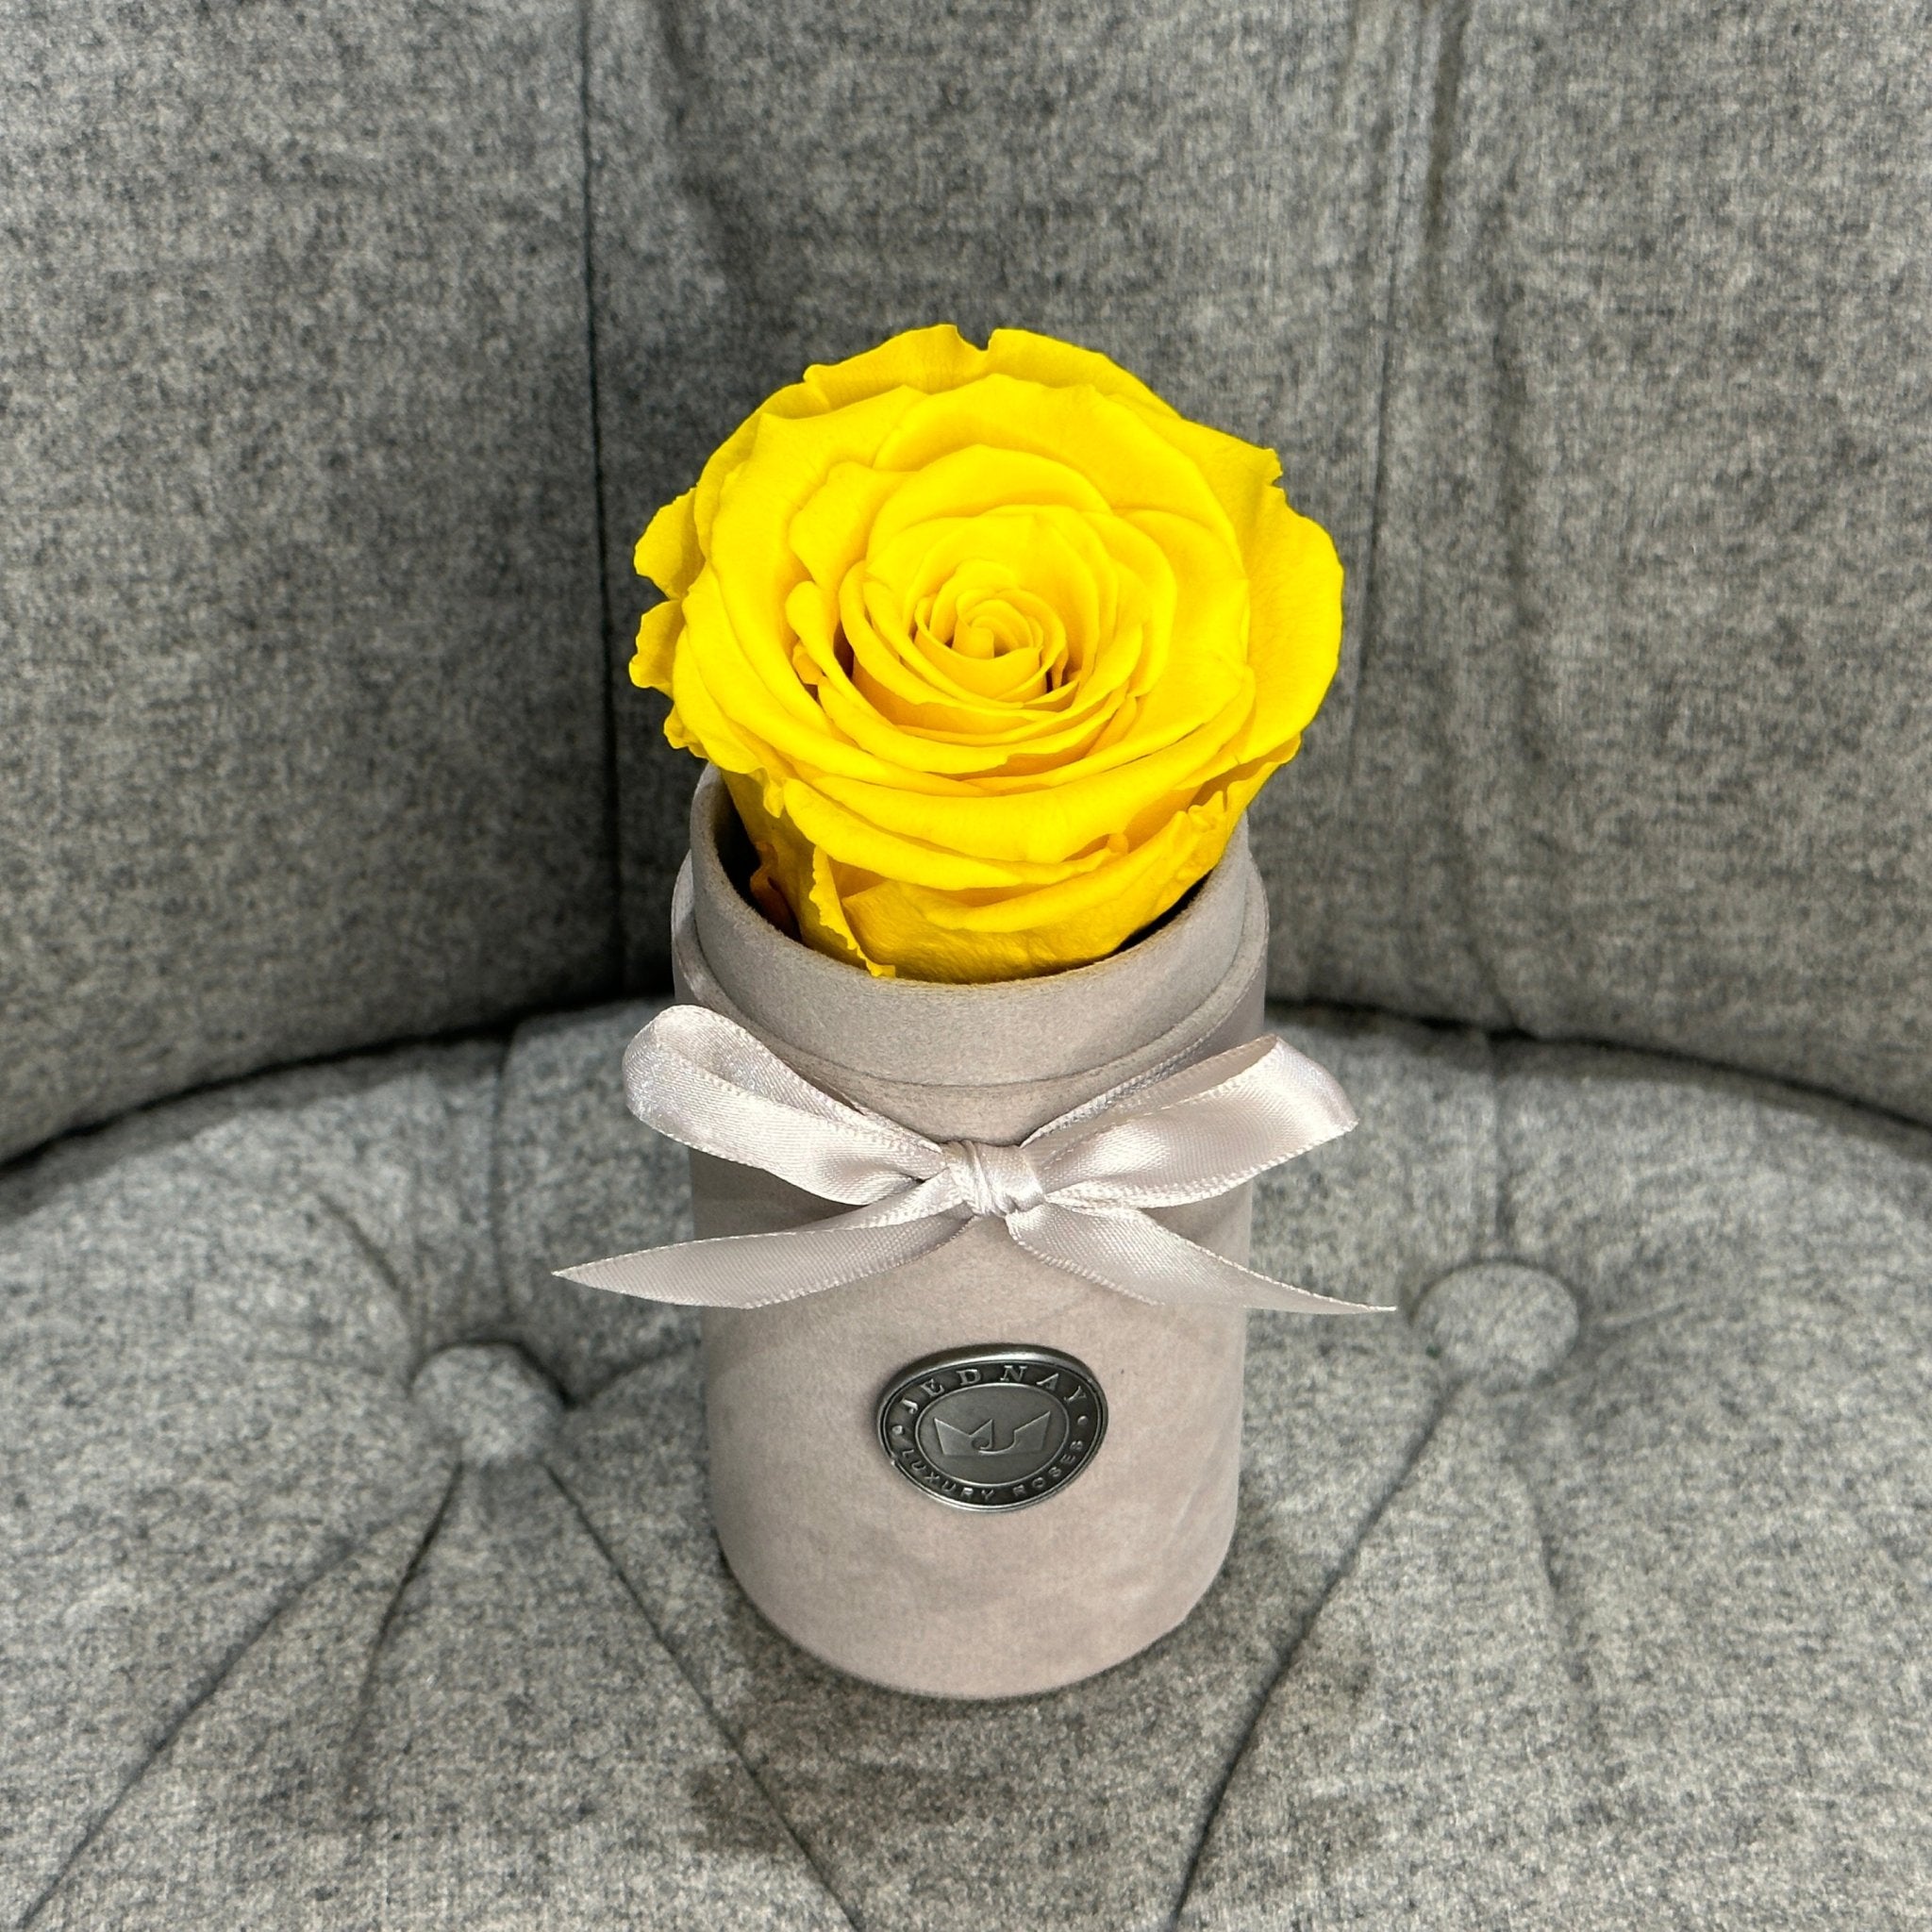 Single Grey Suede Forever Rose Box - Sunshine Yellow Eternal Rose - Jednay Roses